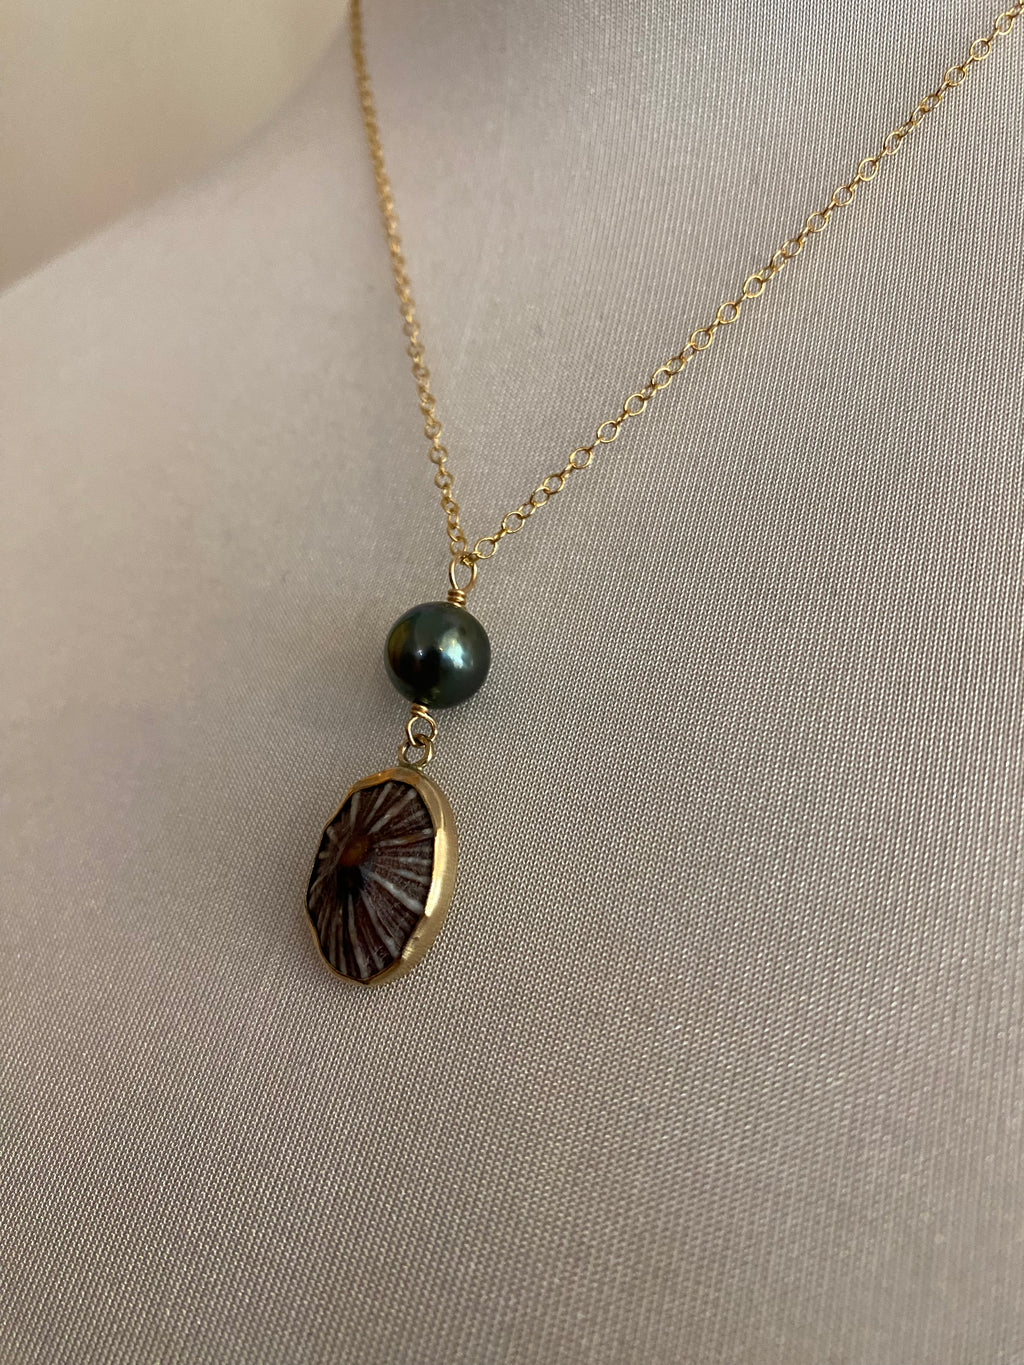 Opihi and Tahitian Pearl Necklace